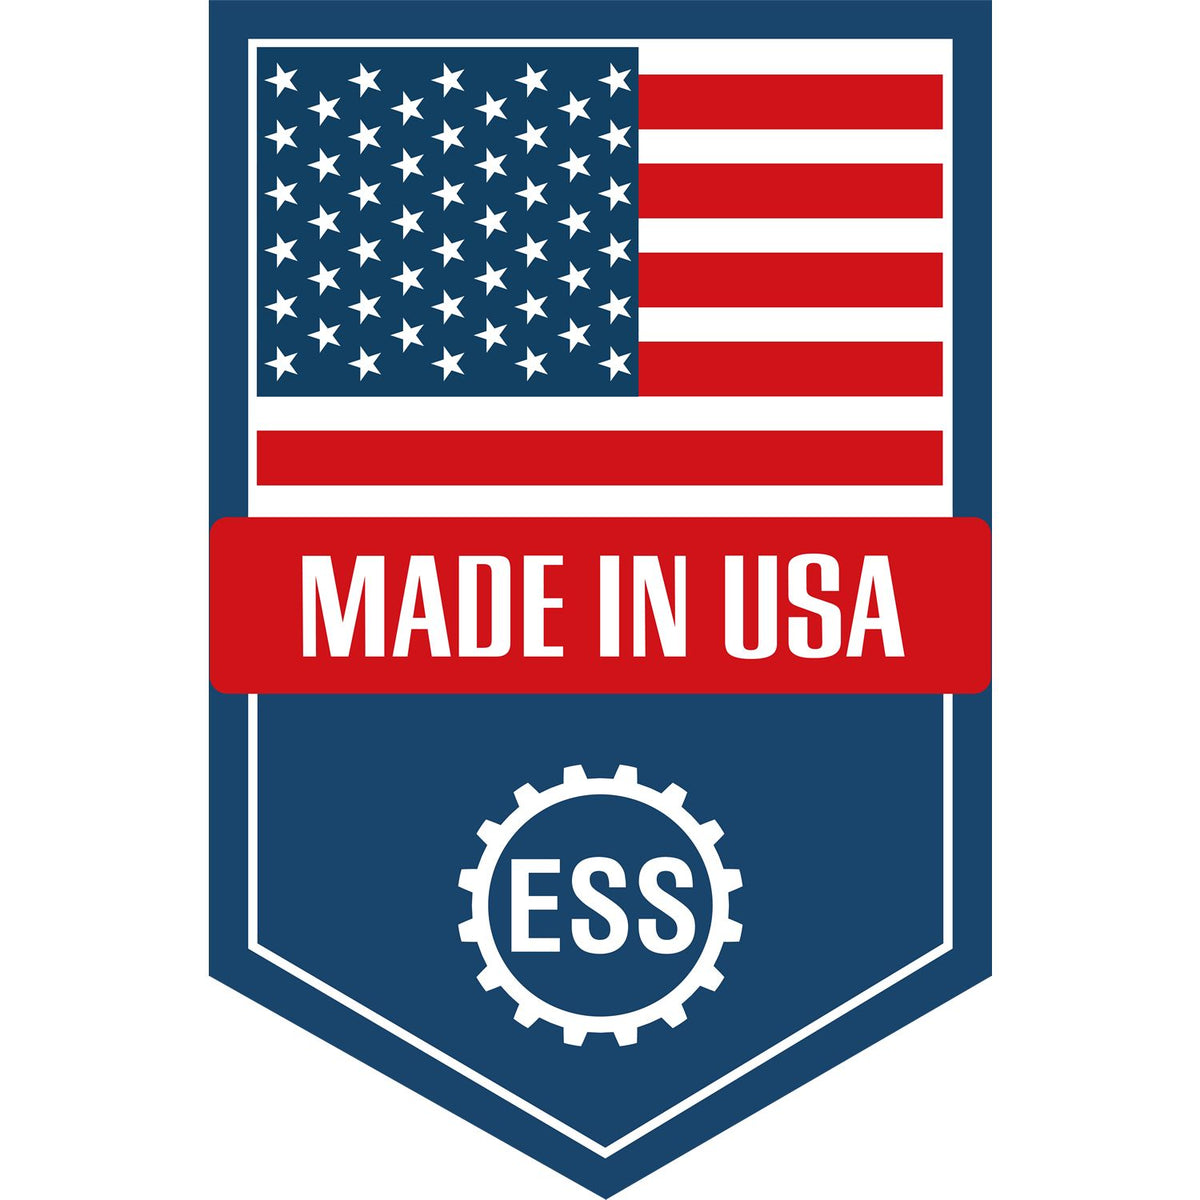 An icon or graphic with an american flag and text reading Made in USA for the South Carolina Professional Engineer Seal Stamp